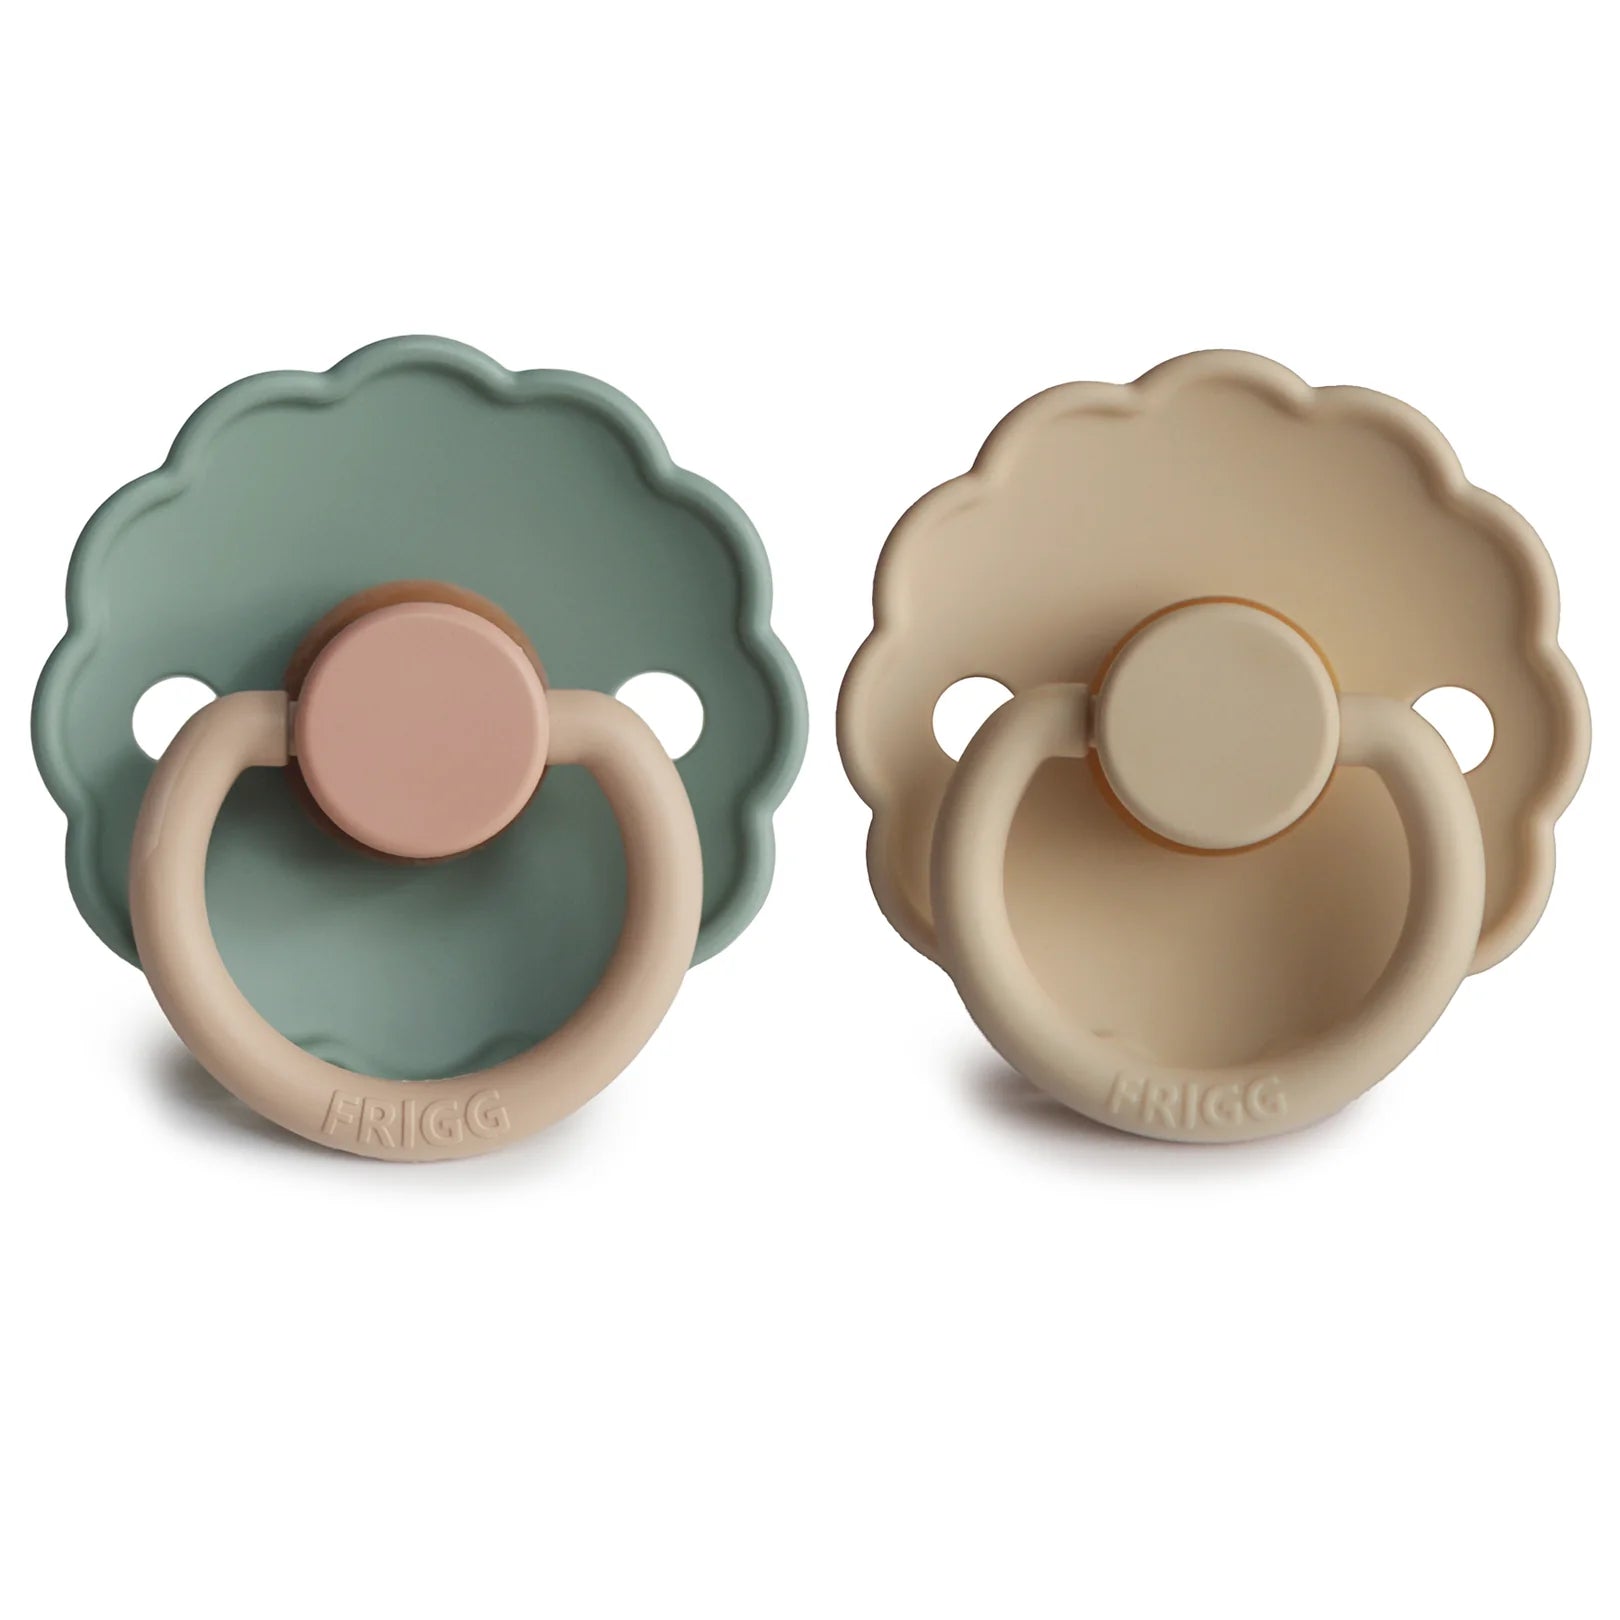 FRIGG DAISY Natural Rubber Pacifier - Pack of 2